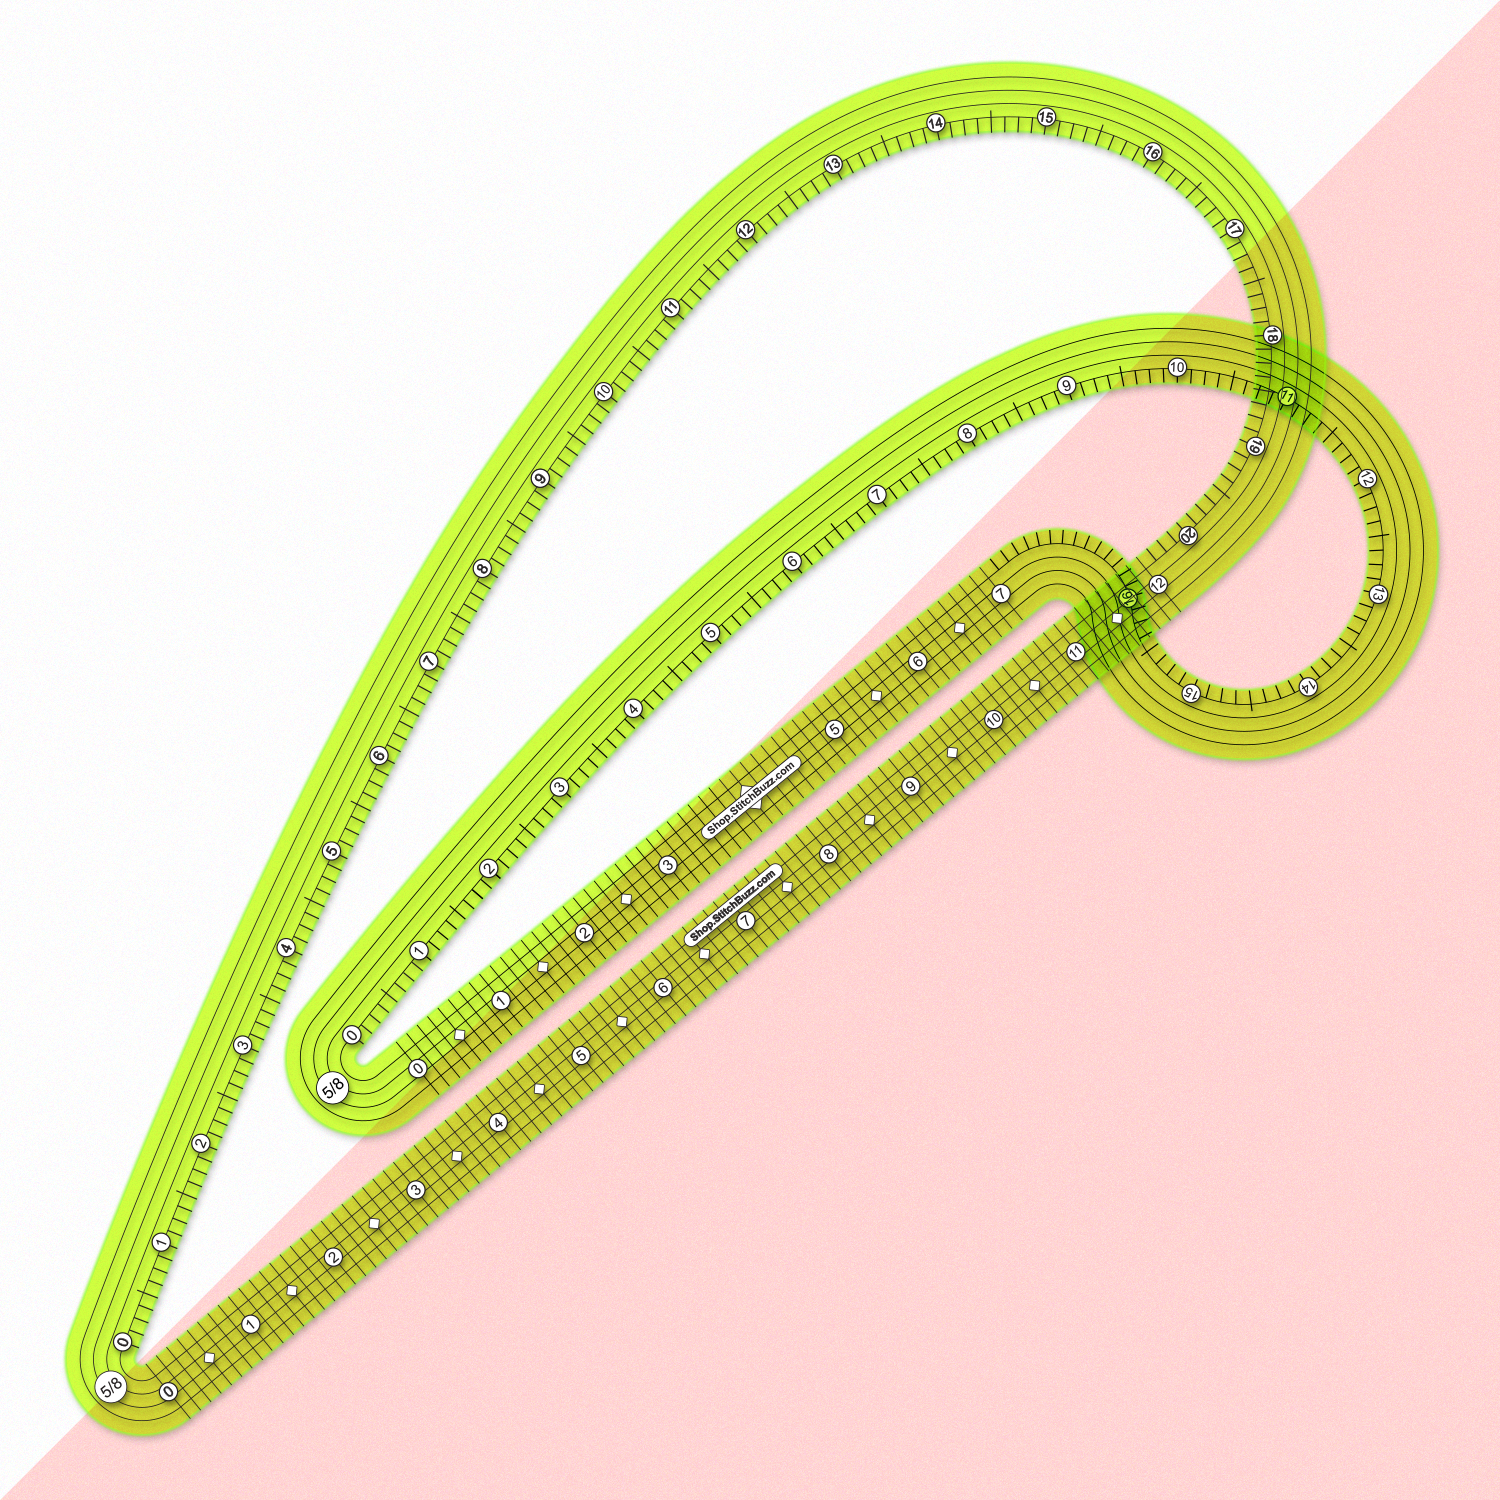 five-eighths inch seam allowance french curve ruler small and large transparent yellow green plastic